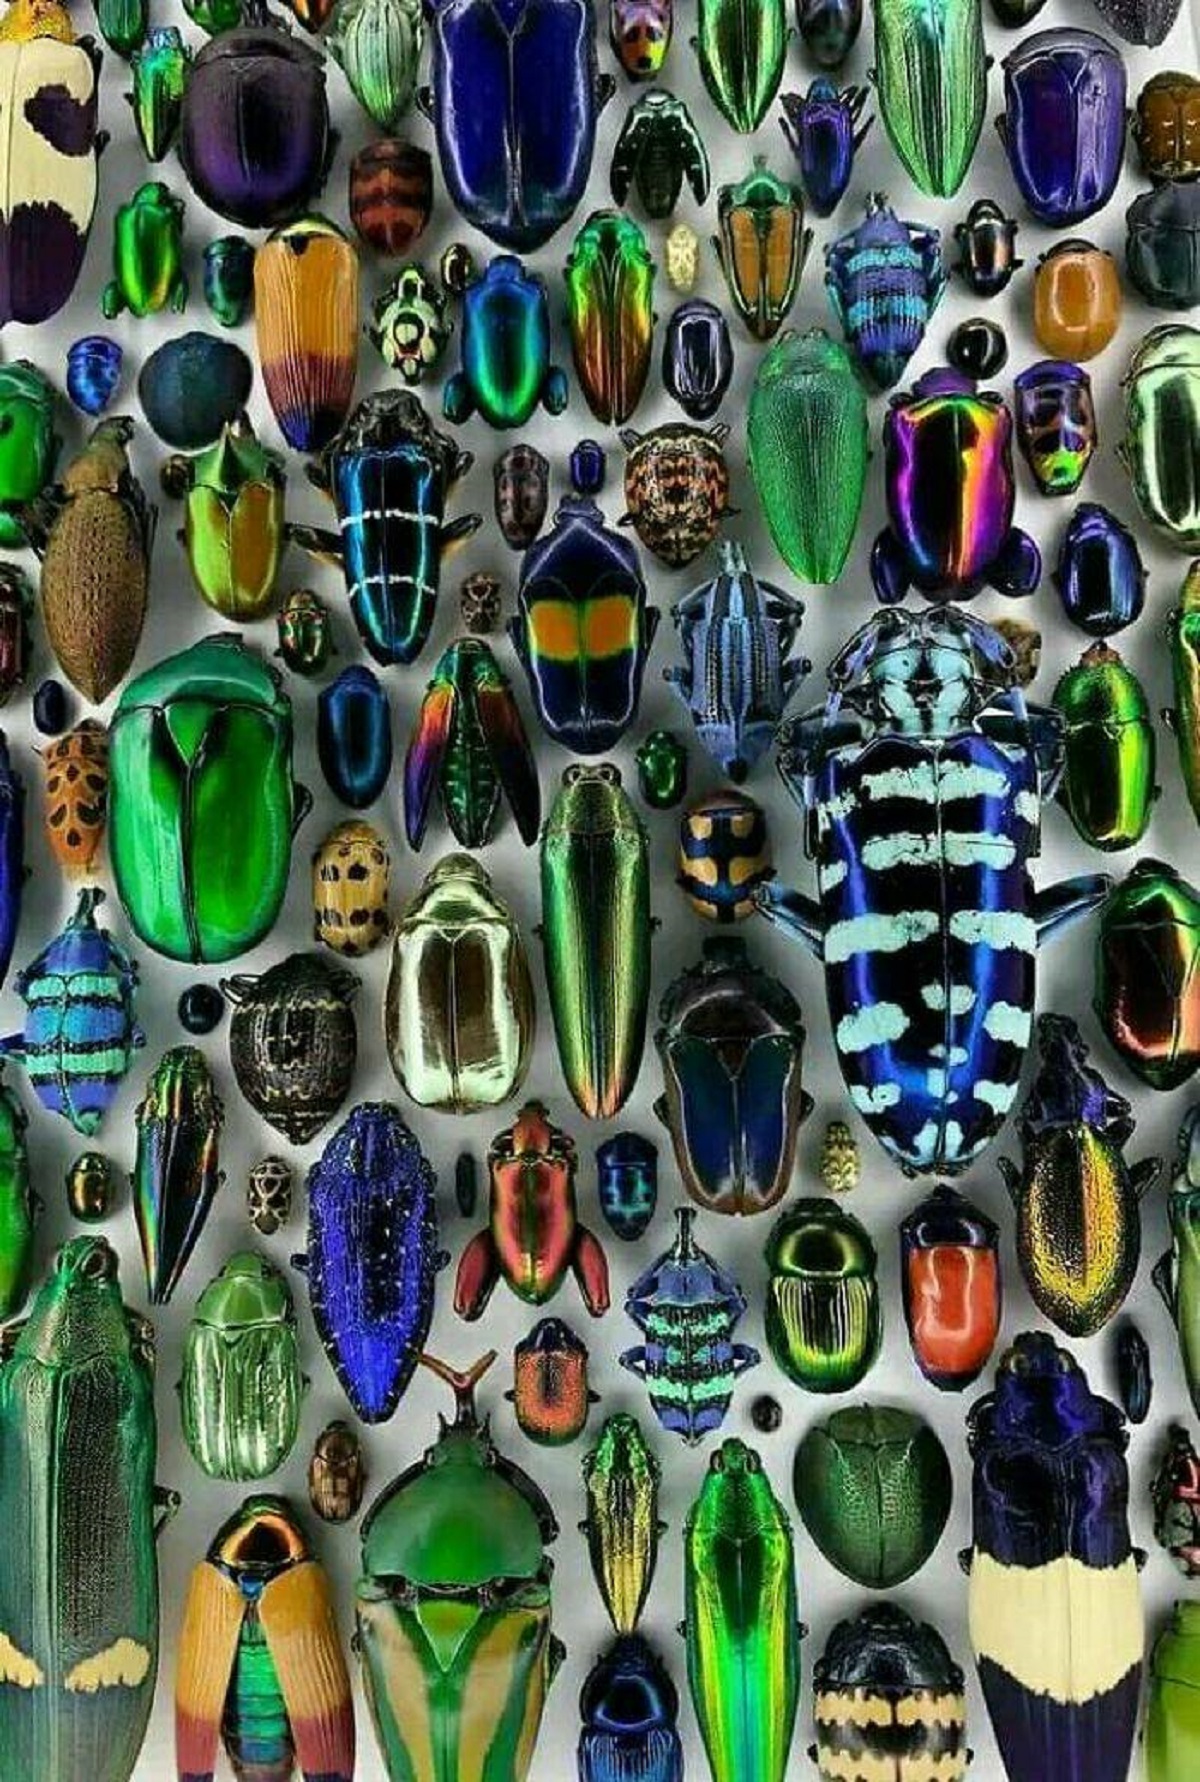 "This Beetle Display By Christopher Marley. (No Photo Filters Used)"